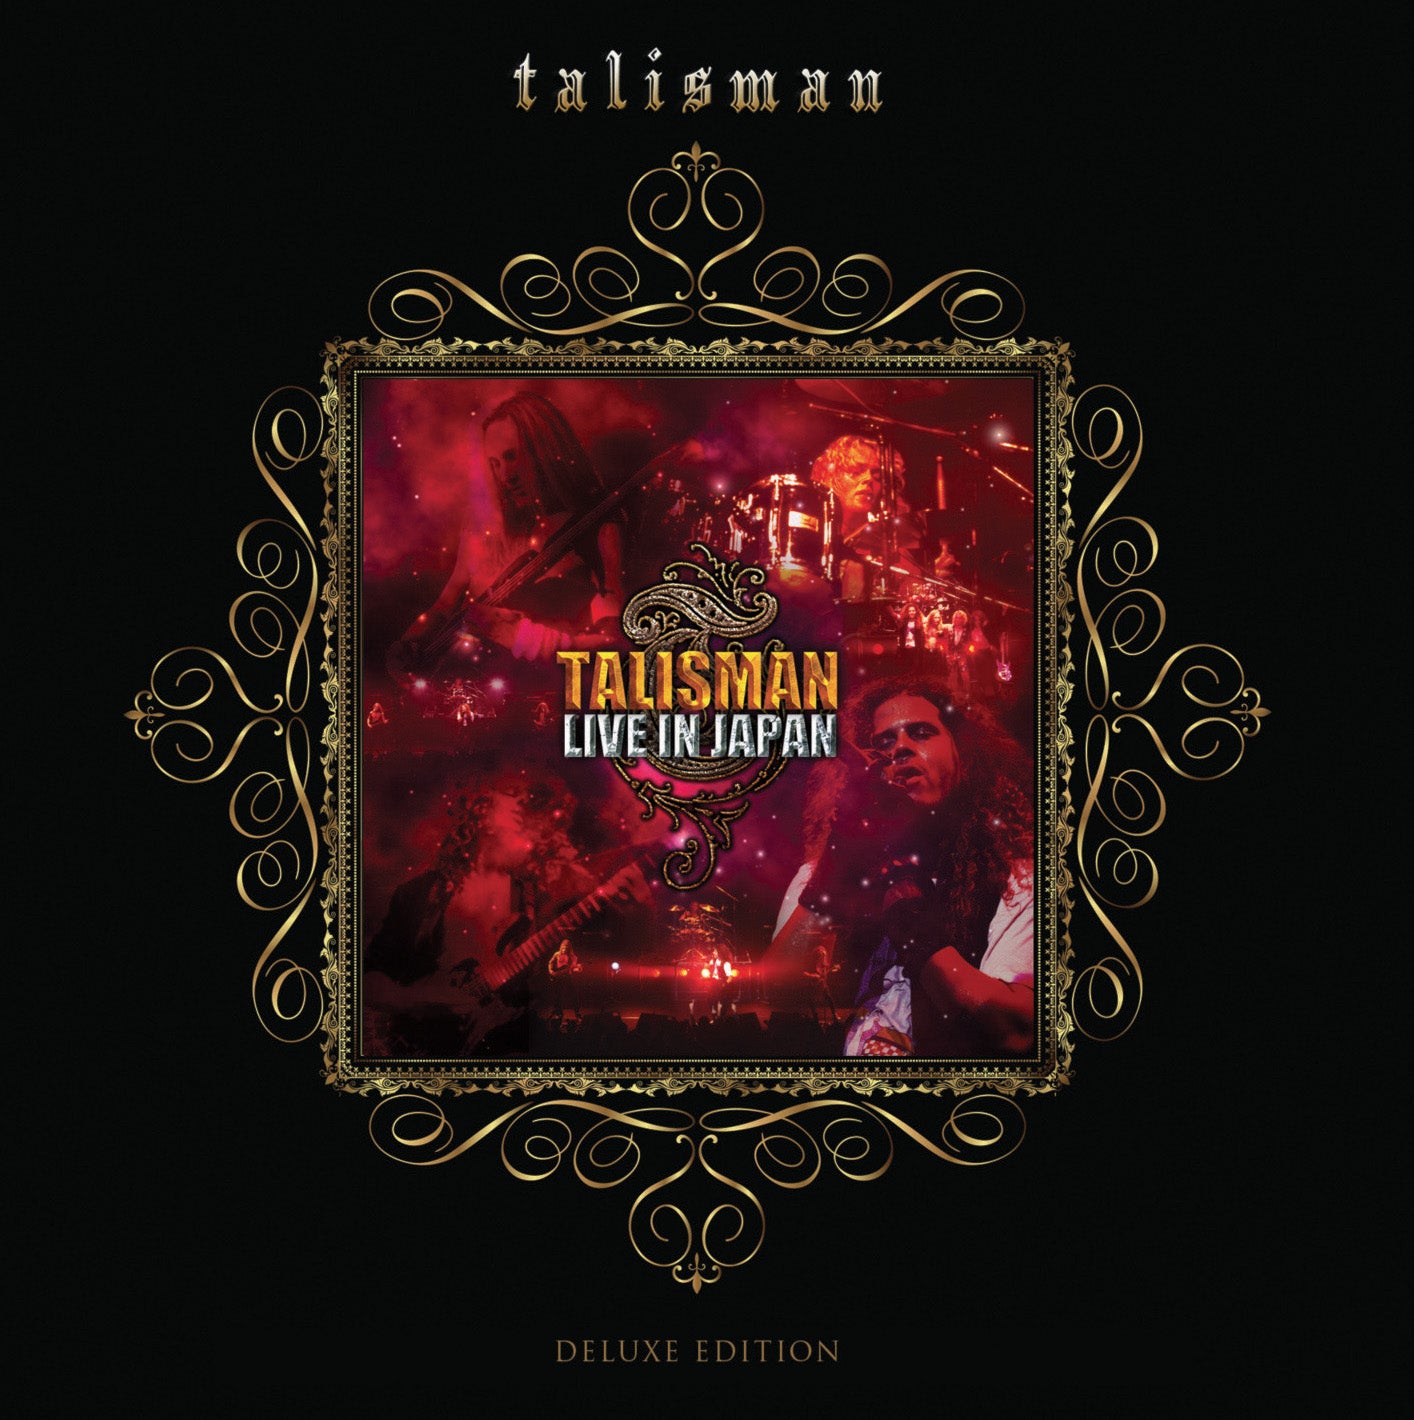 CD Talisman - 3rd album, Live In Japan (Deluxe Edition)